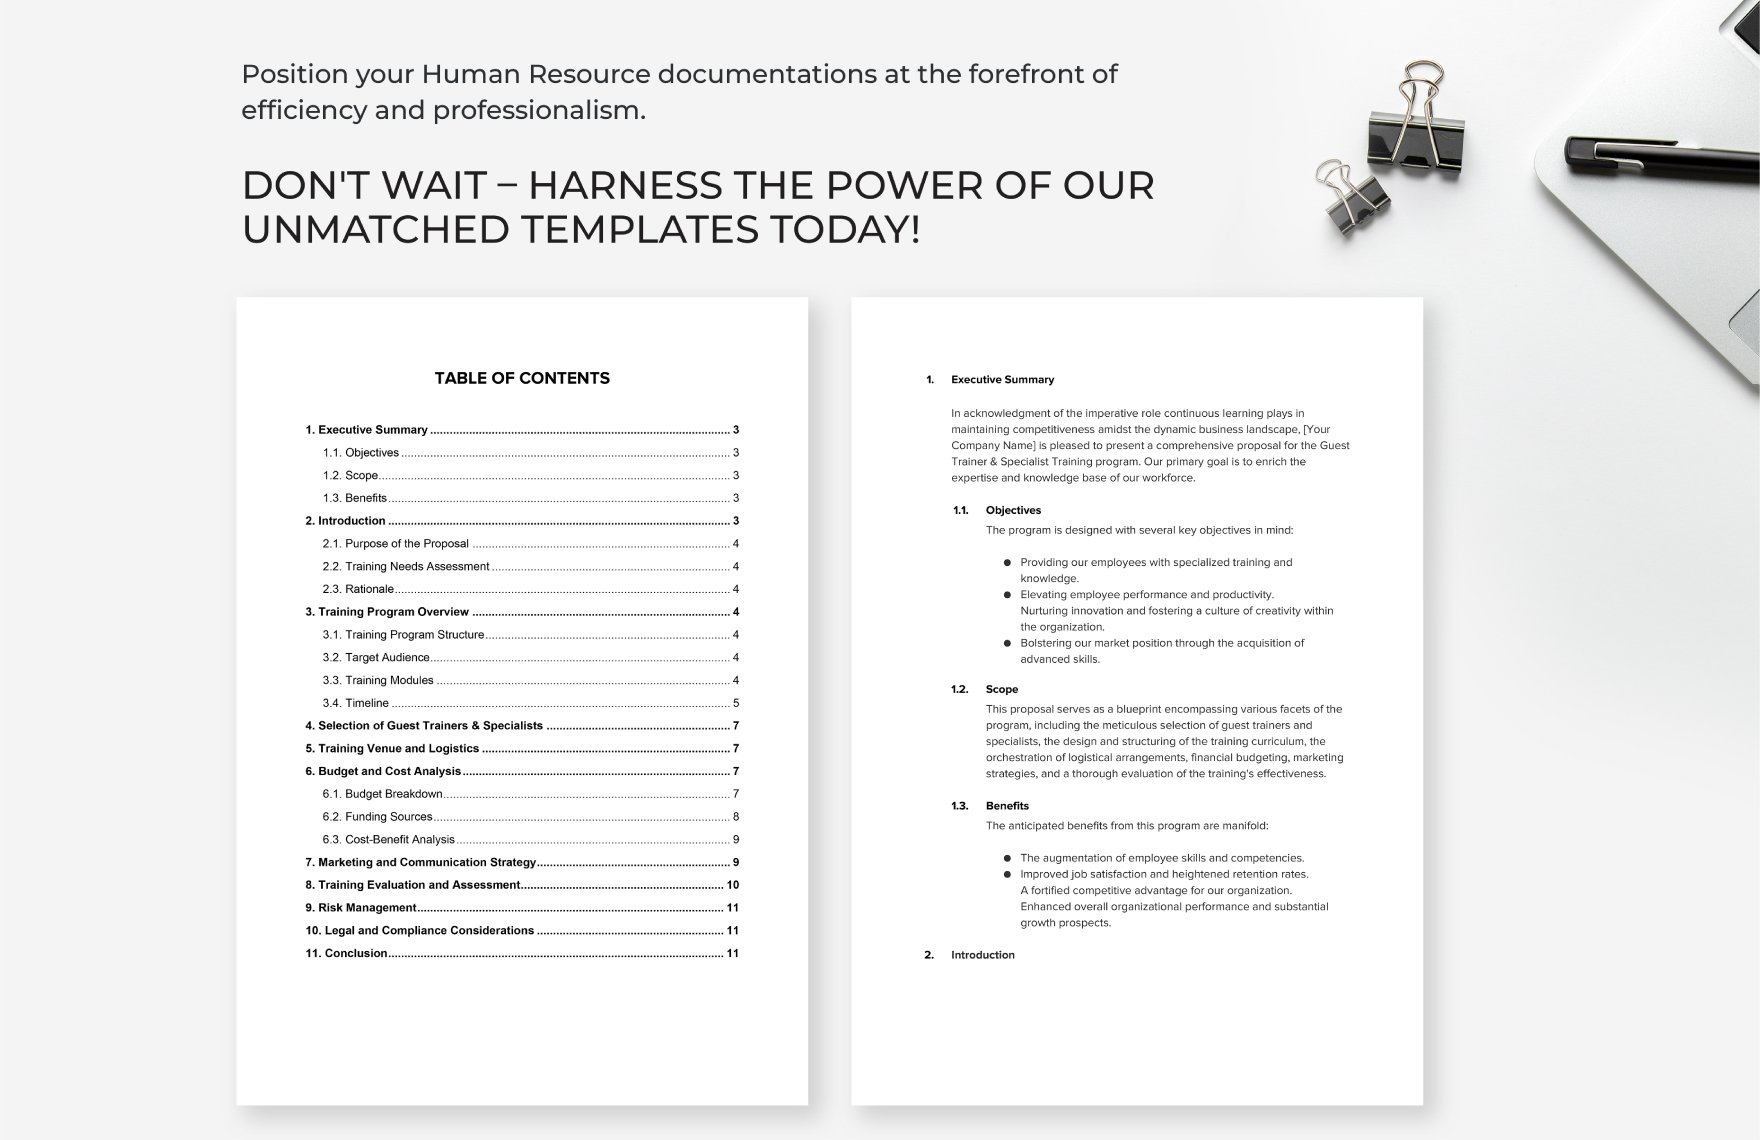 Guest Trainer Specialist Training Proposal HR Template